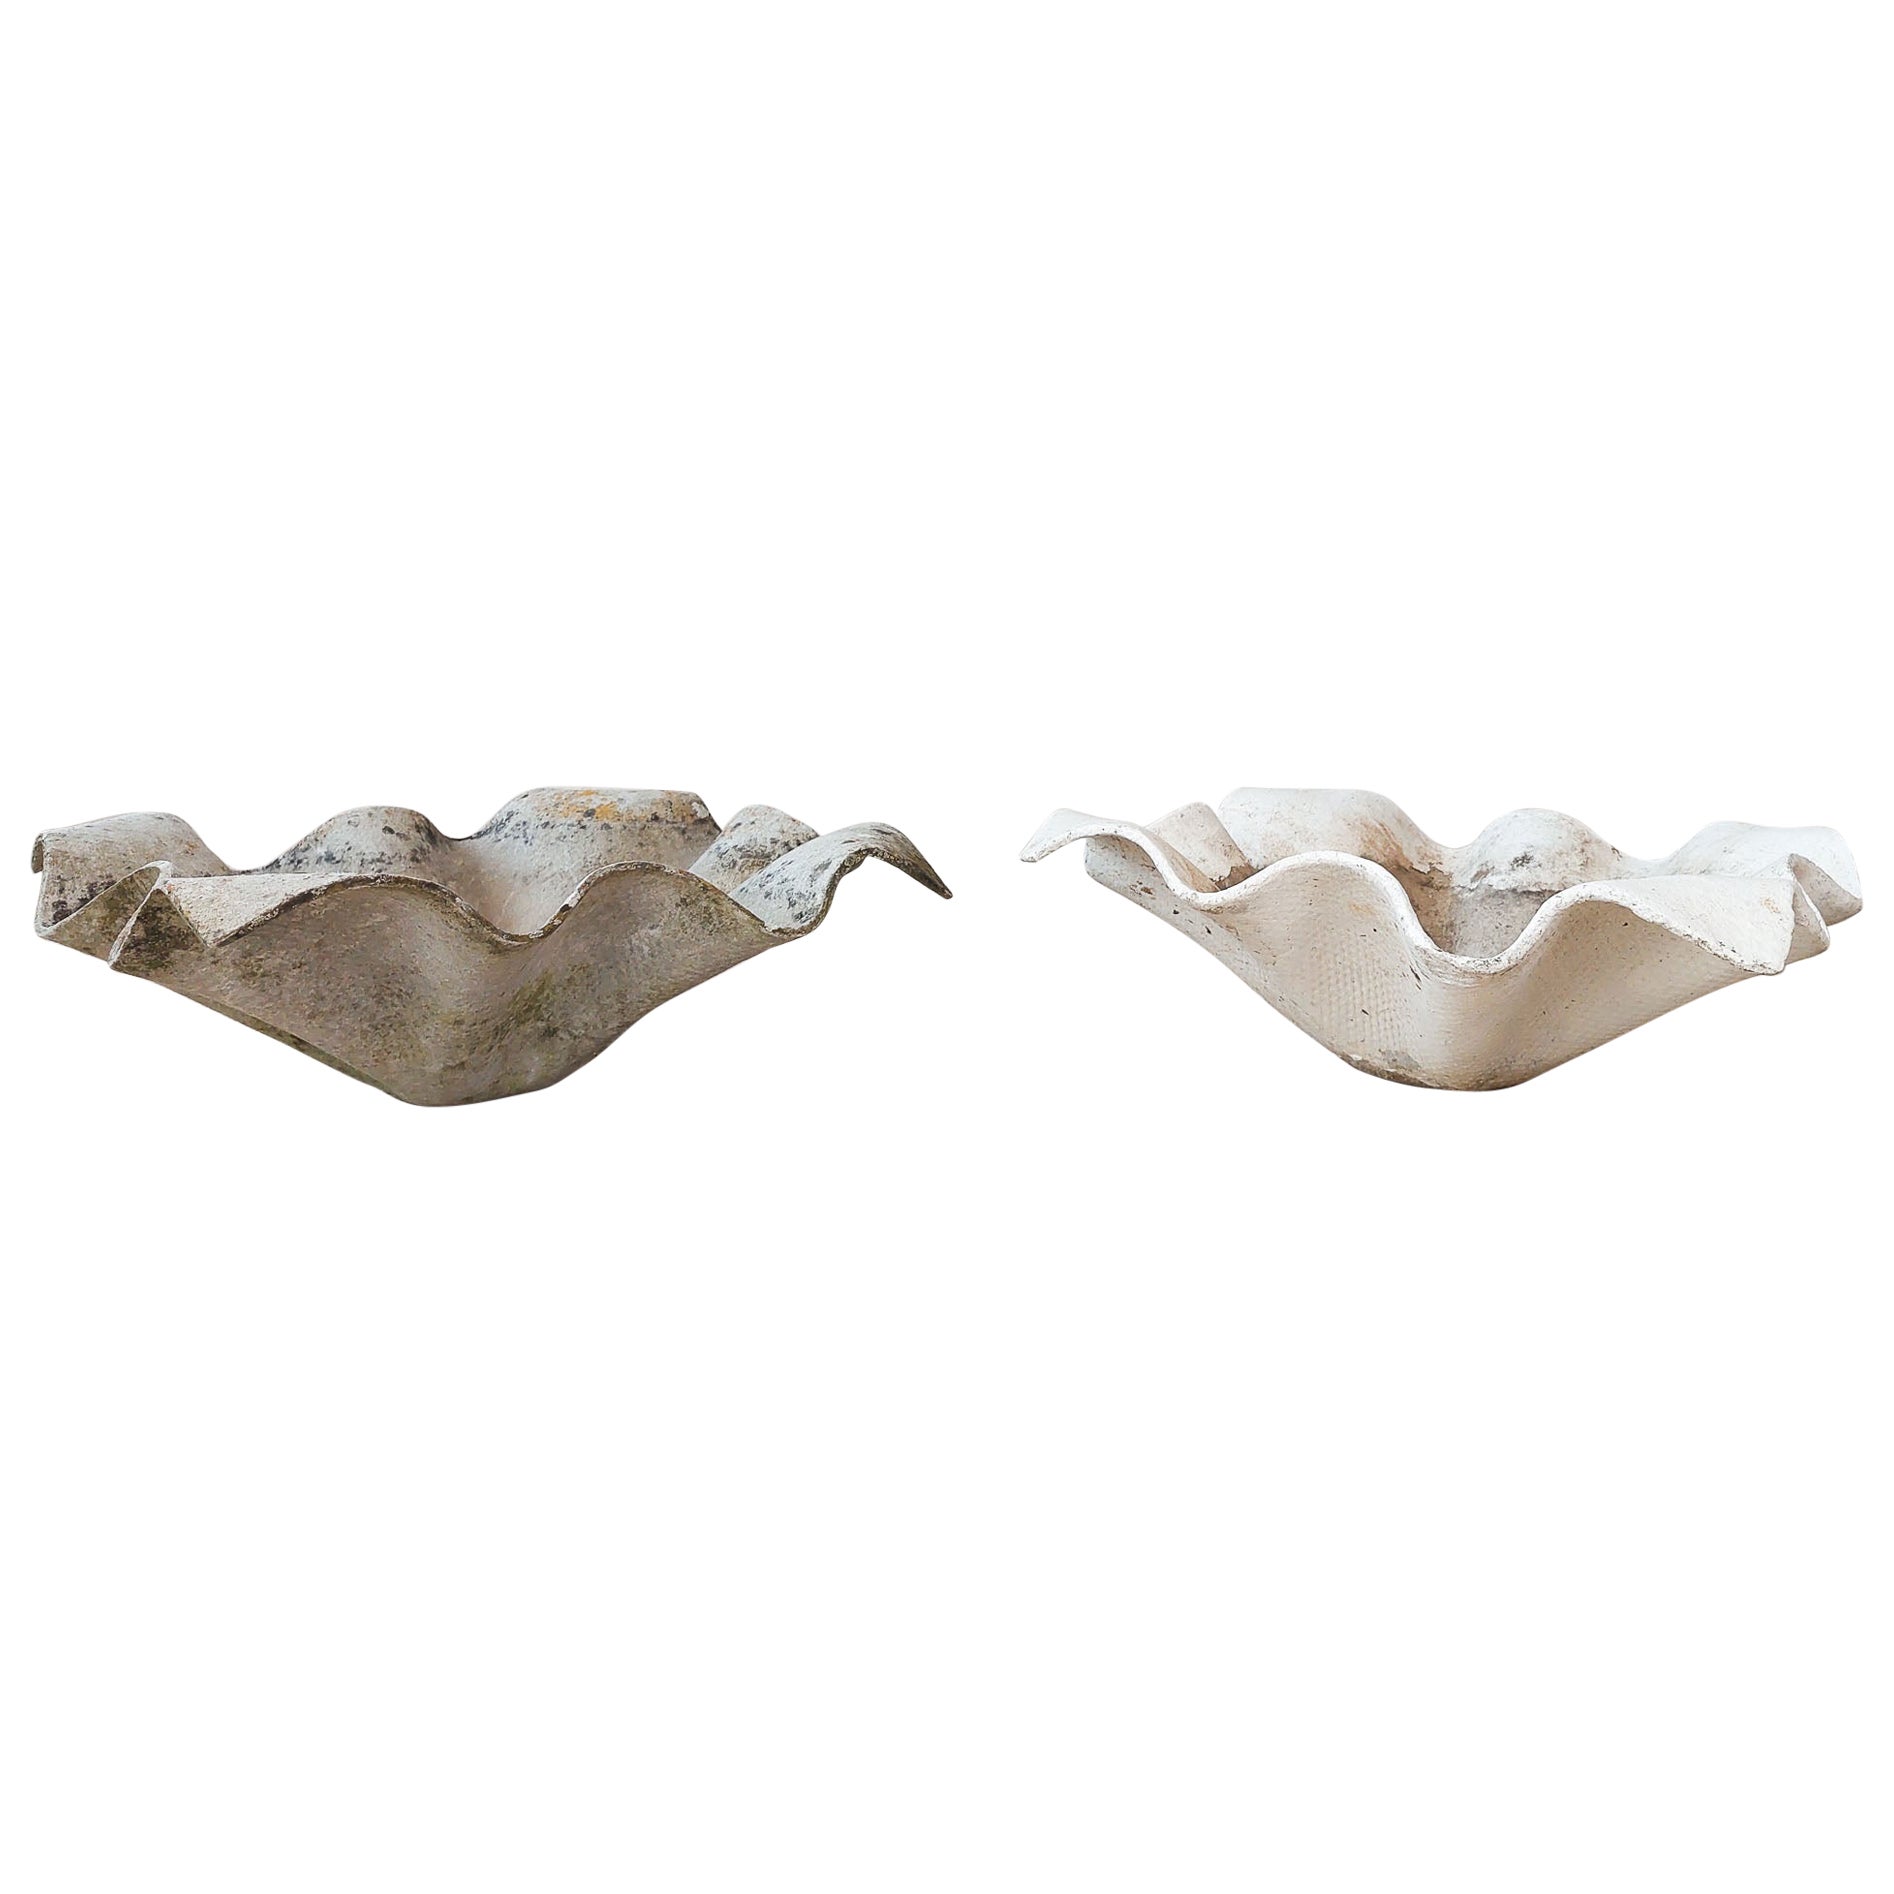 Willy Guhl Small Handkerchief Planter by Eternit (multiple available)